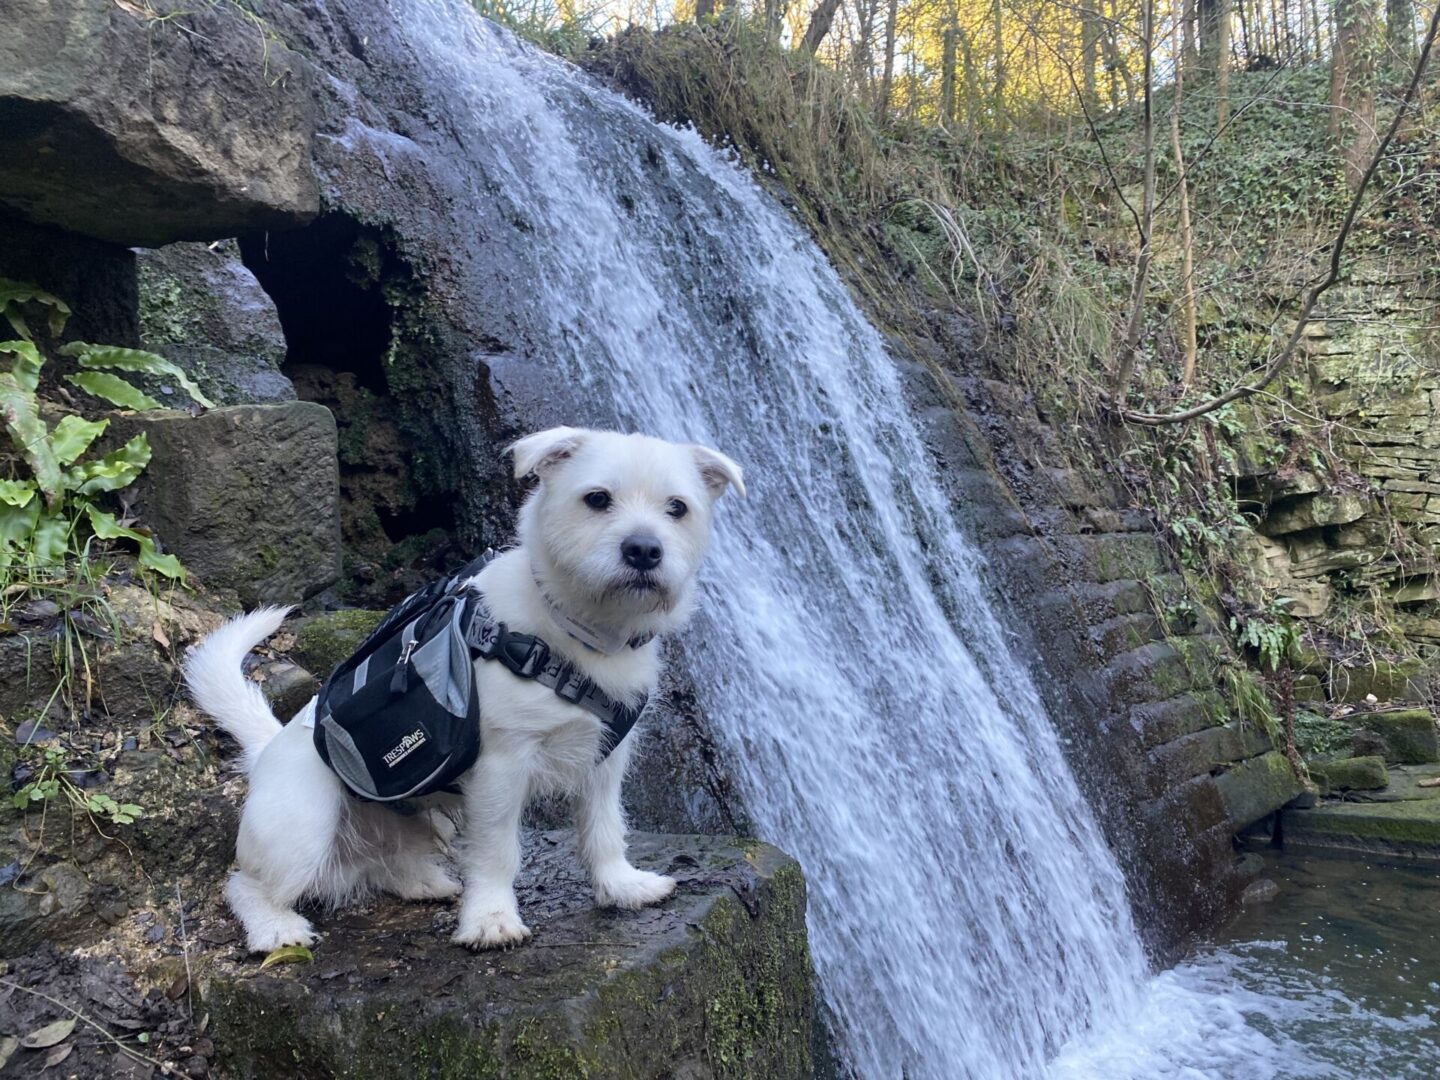 Westie dog sat by a waterfall wearing the trespaws small dog backpack harness in snooper black.
adventure dog harness
outdoor dog
countryside
